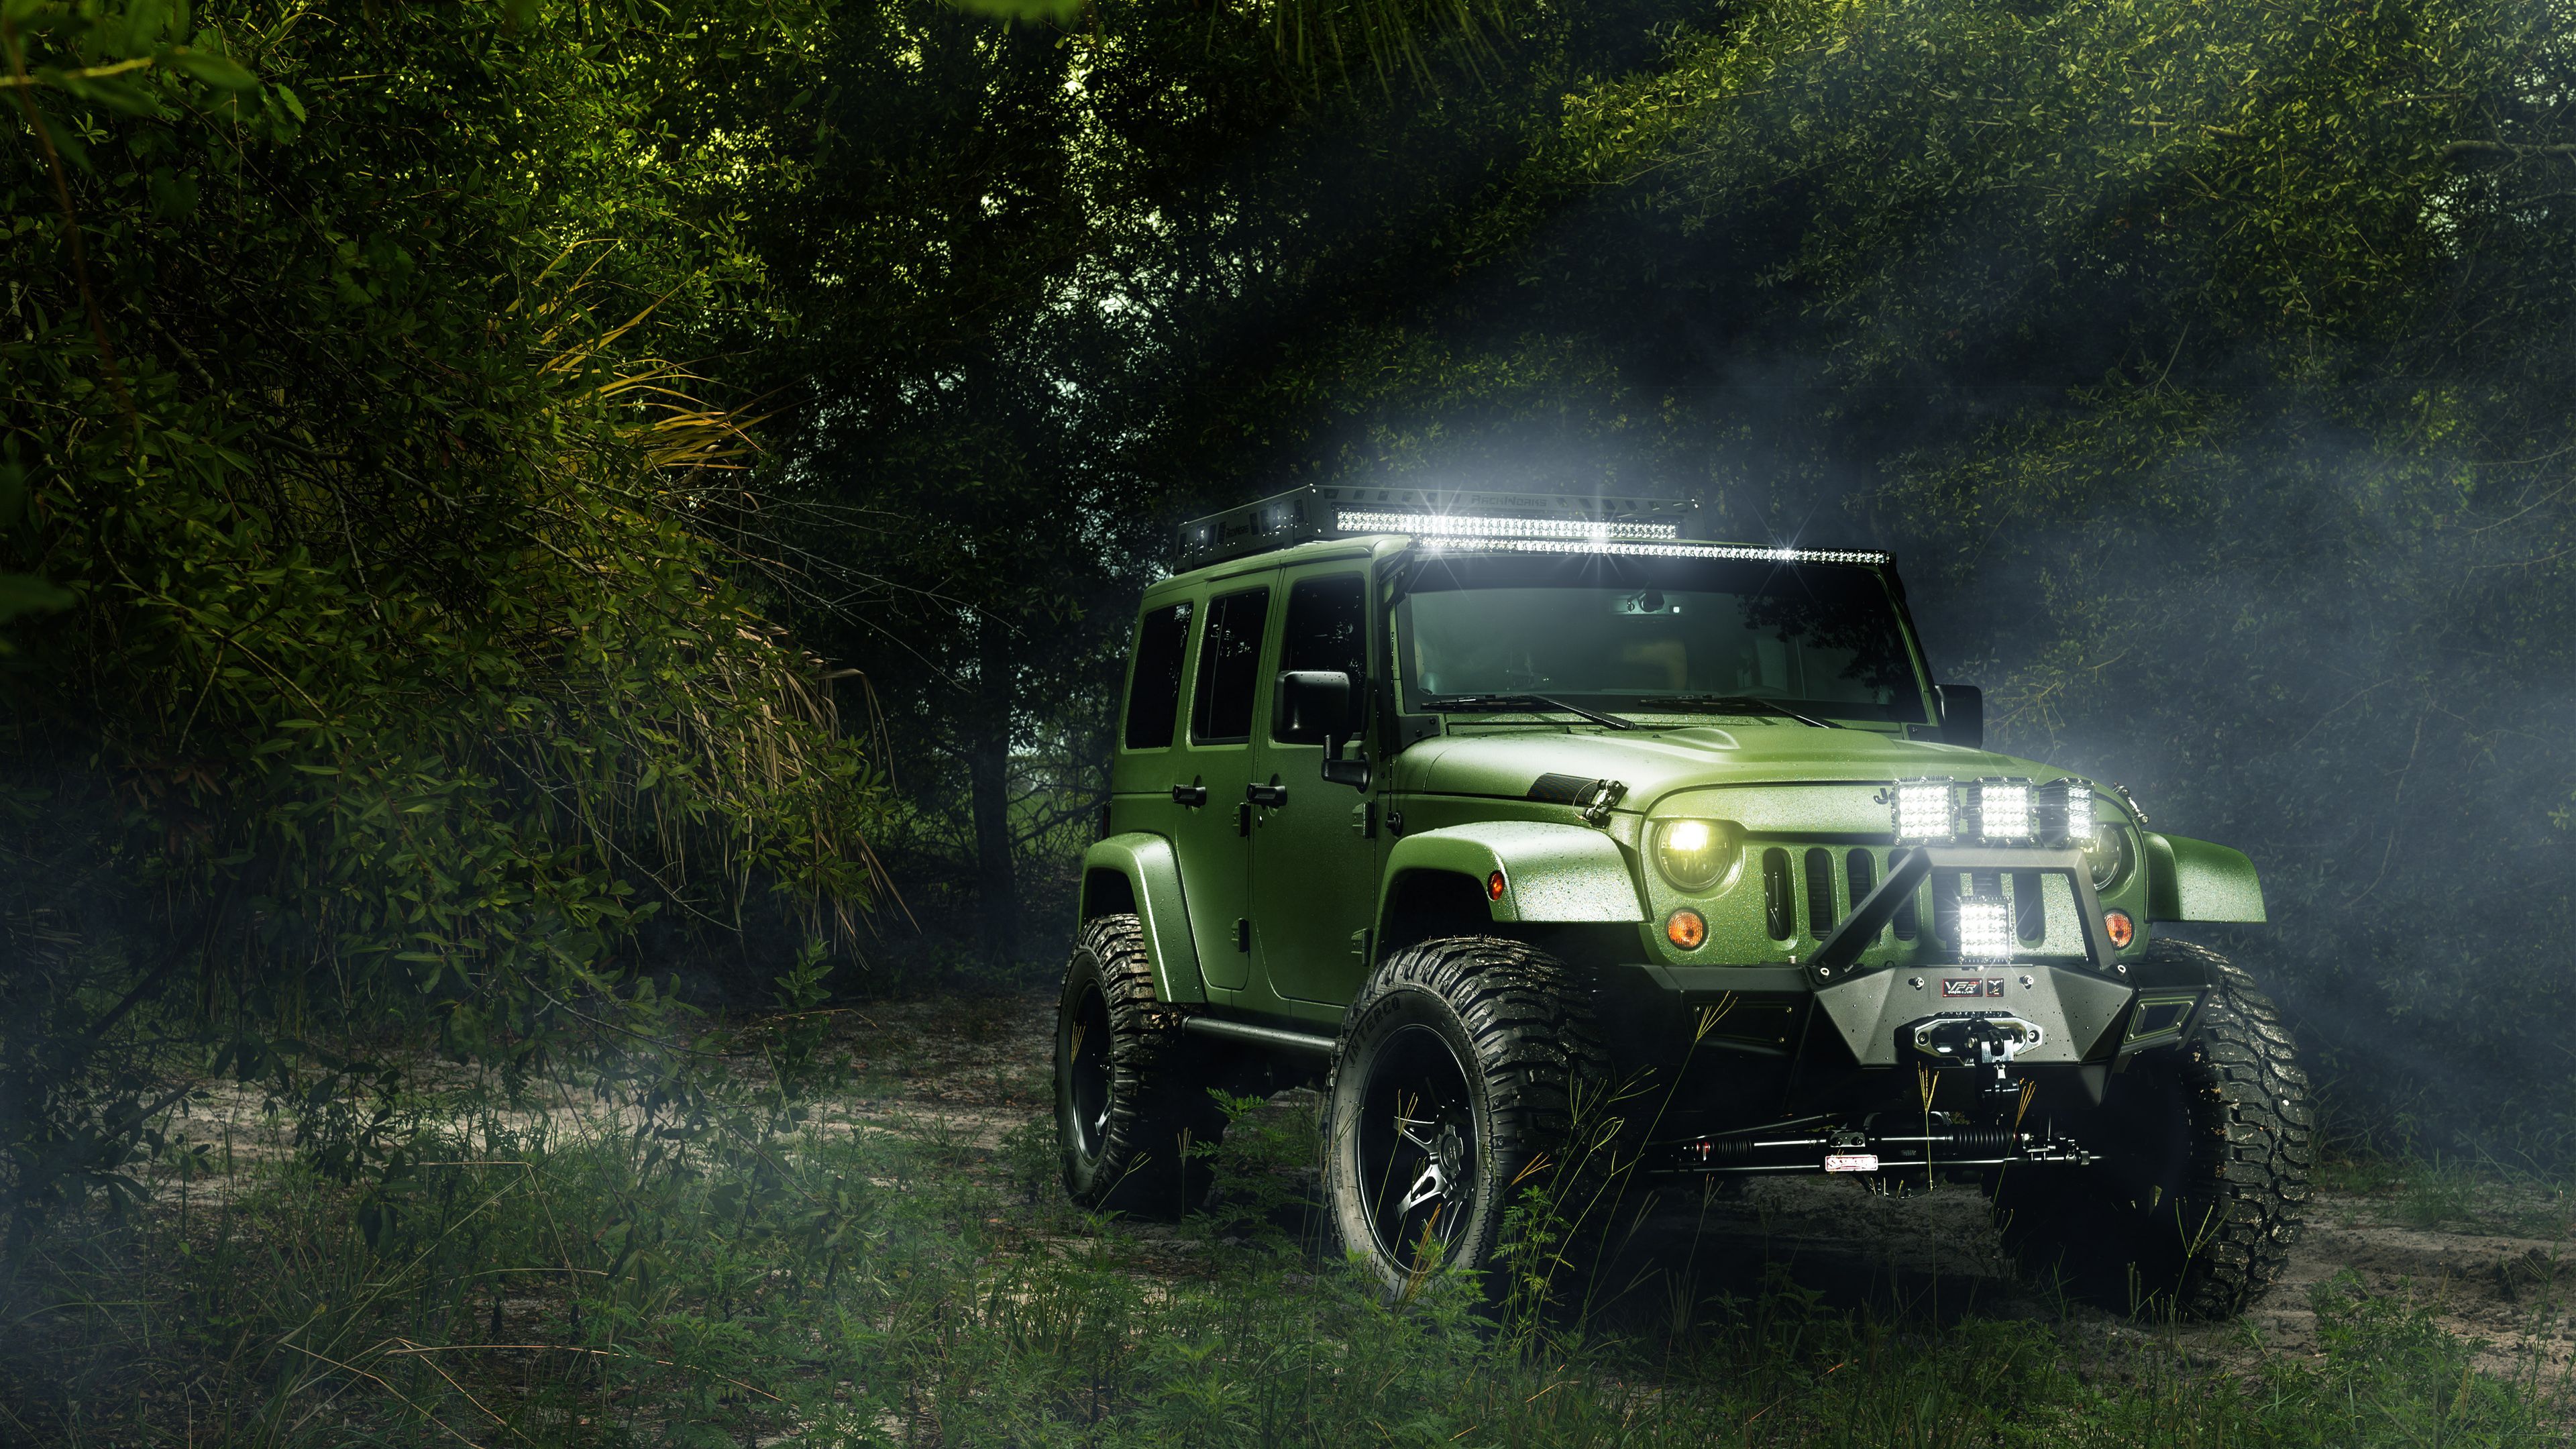 Jeep Wrangler Wallpapers HD | Full HD Pictures